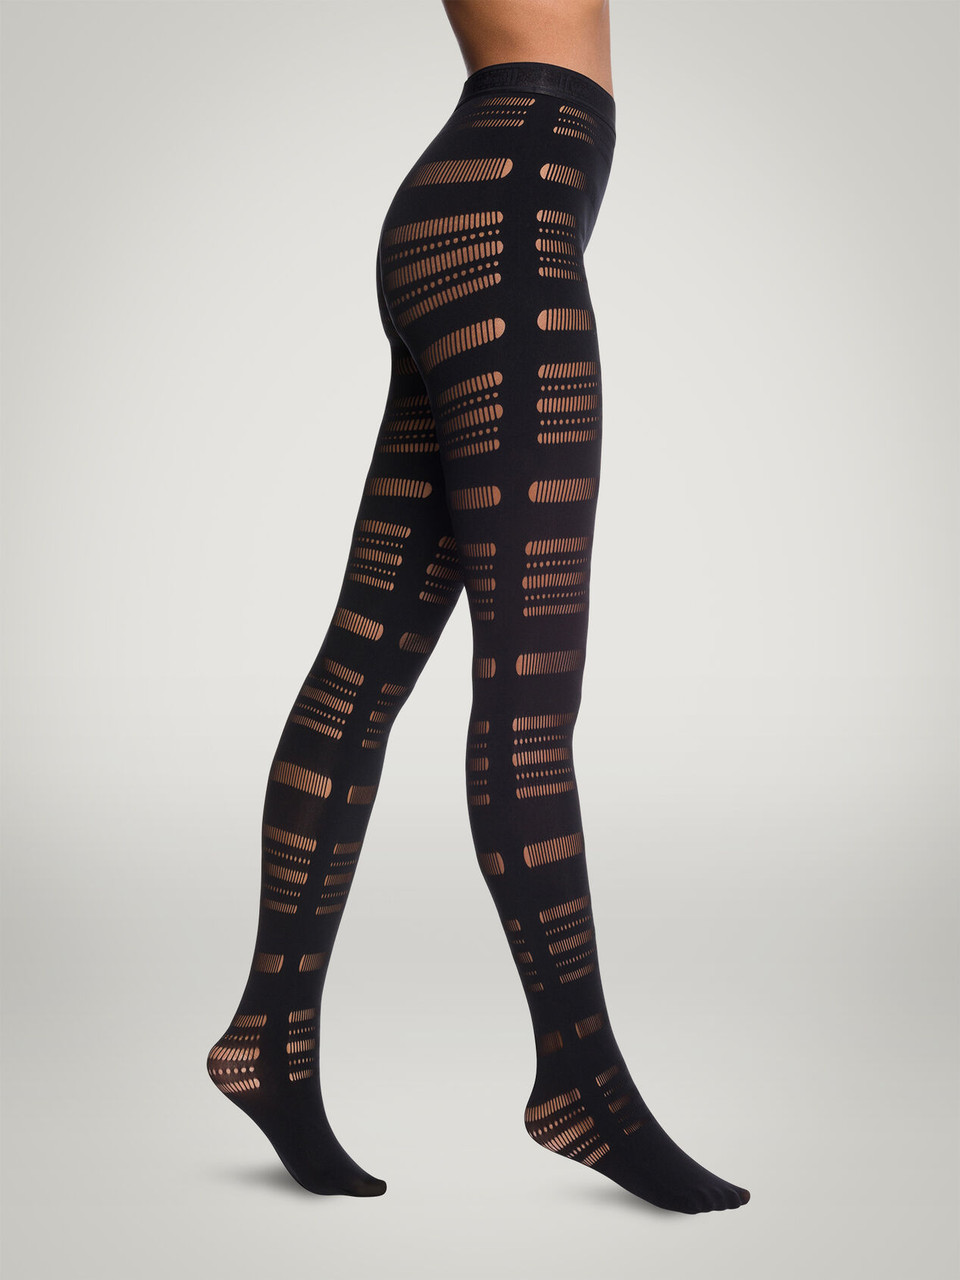 Lacing Net Tights - Wolford Boutique Sydney Australia - New Zealand